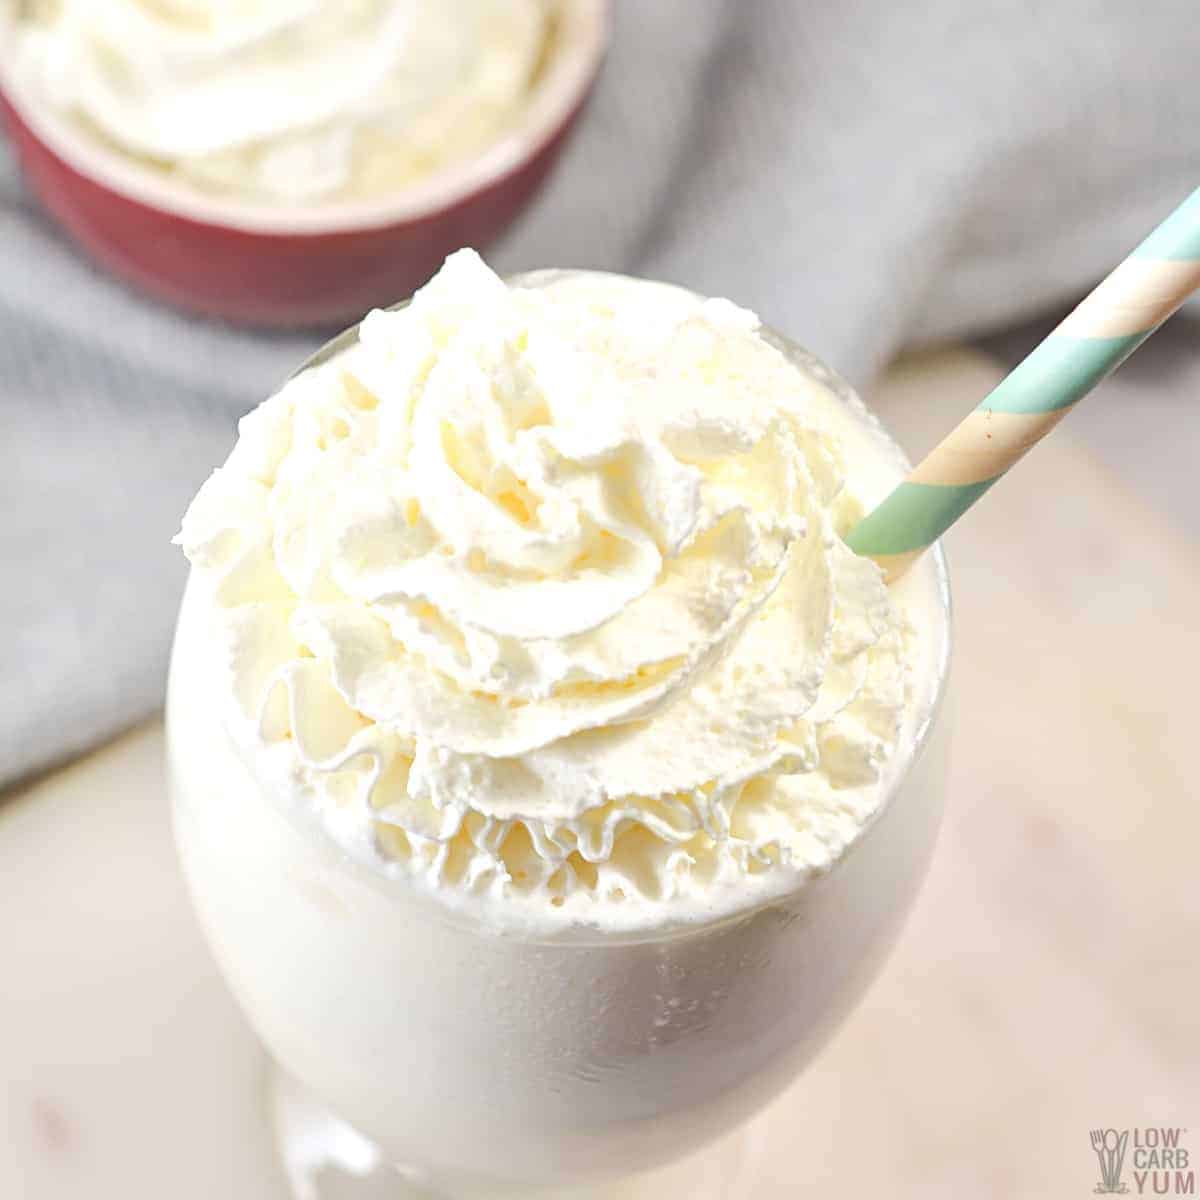 whipped cream garnish added to drink.